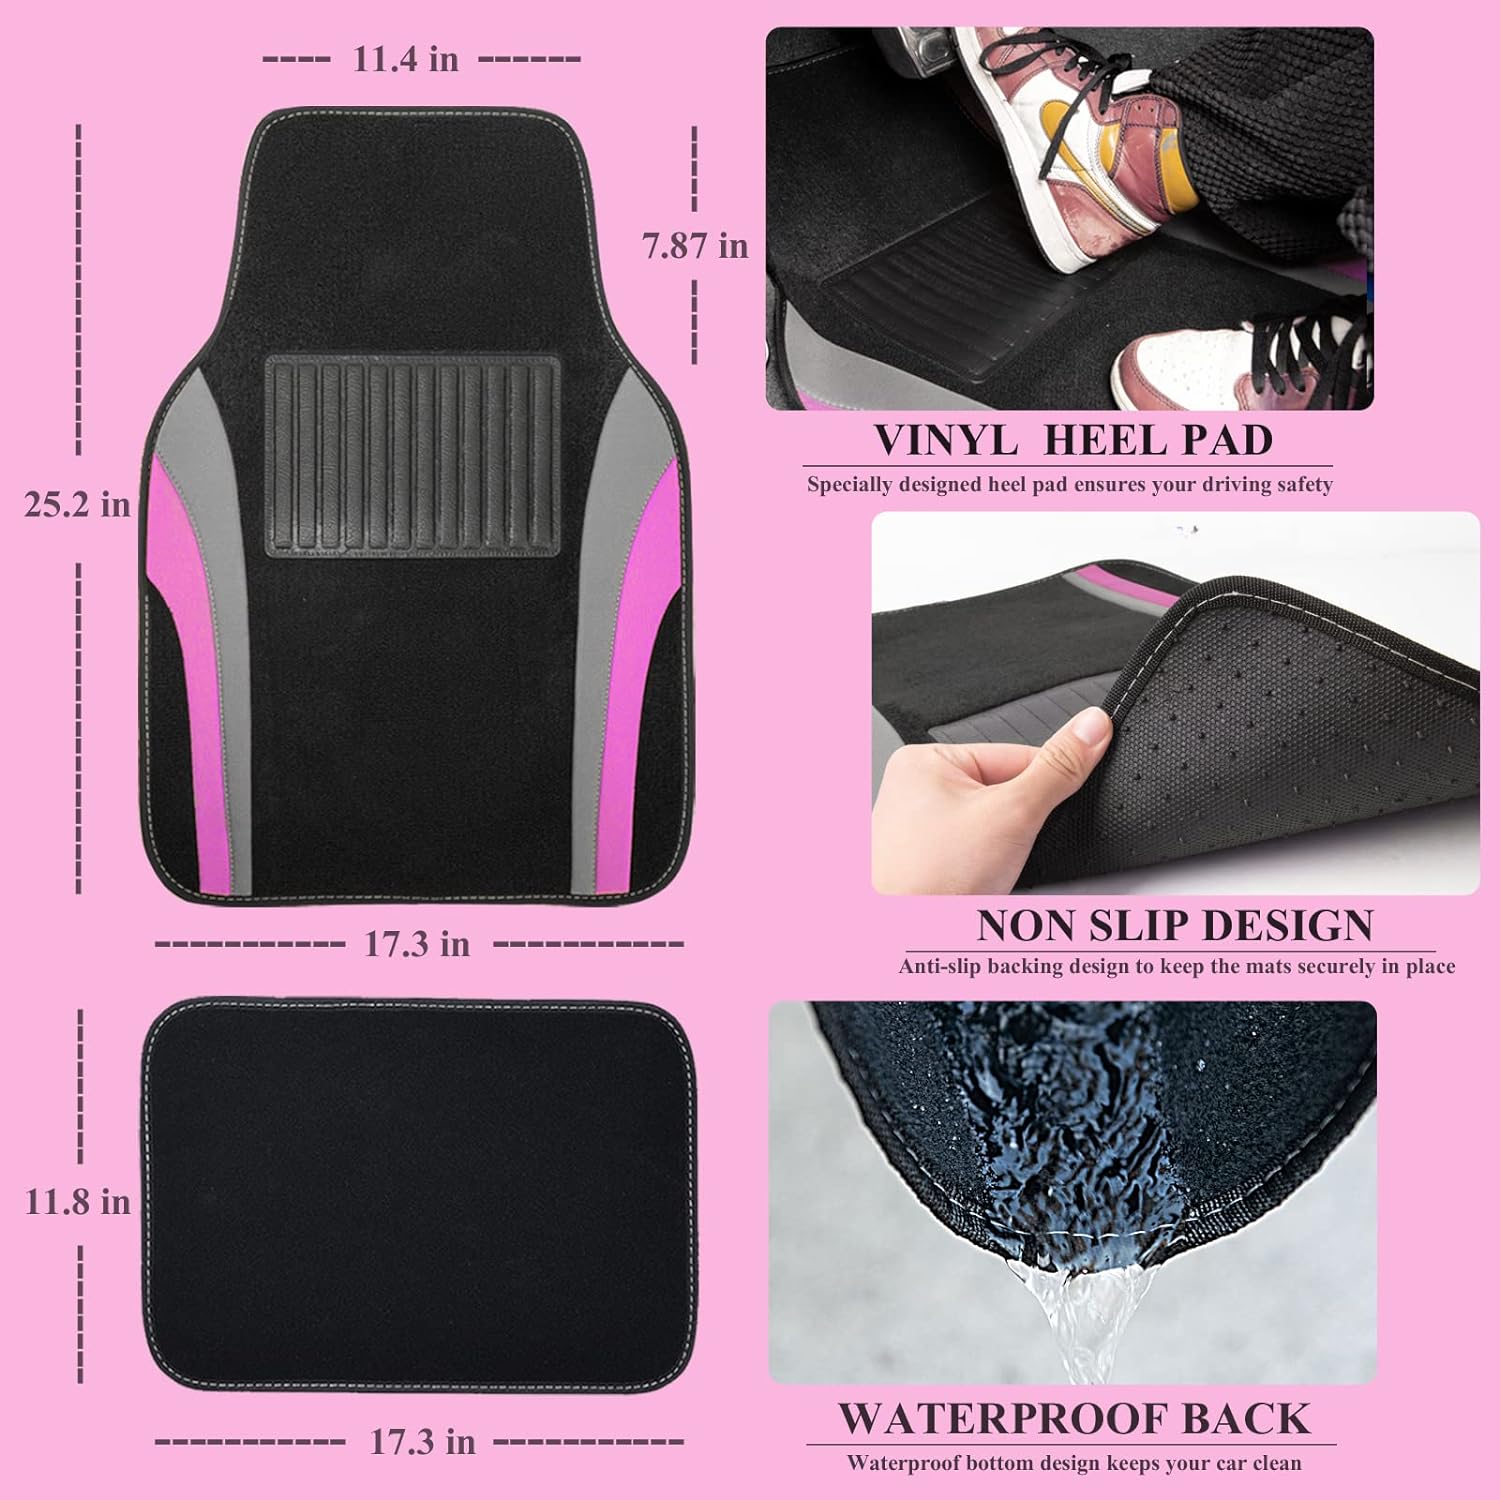 CAR PASS Line Rider Sporty Car Seat Covers Full Set with 4Pcs Waterproof Car Floor Mats Universal Fit Airbag Compatible Automotive Interior Covers for Sedans, Trucks,Vans,SUV (Combo Set, Black & Gray)